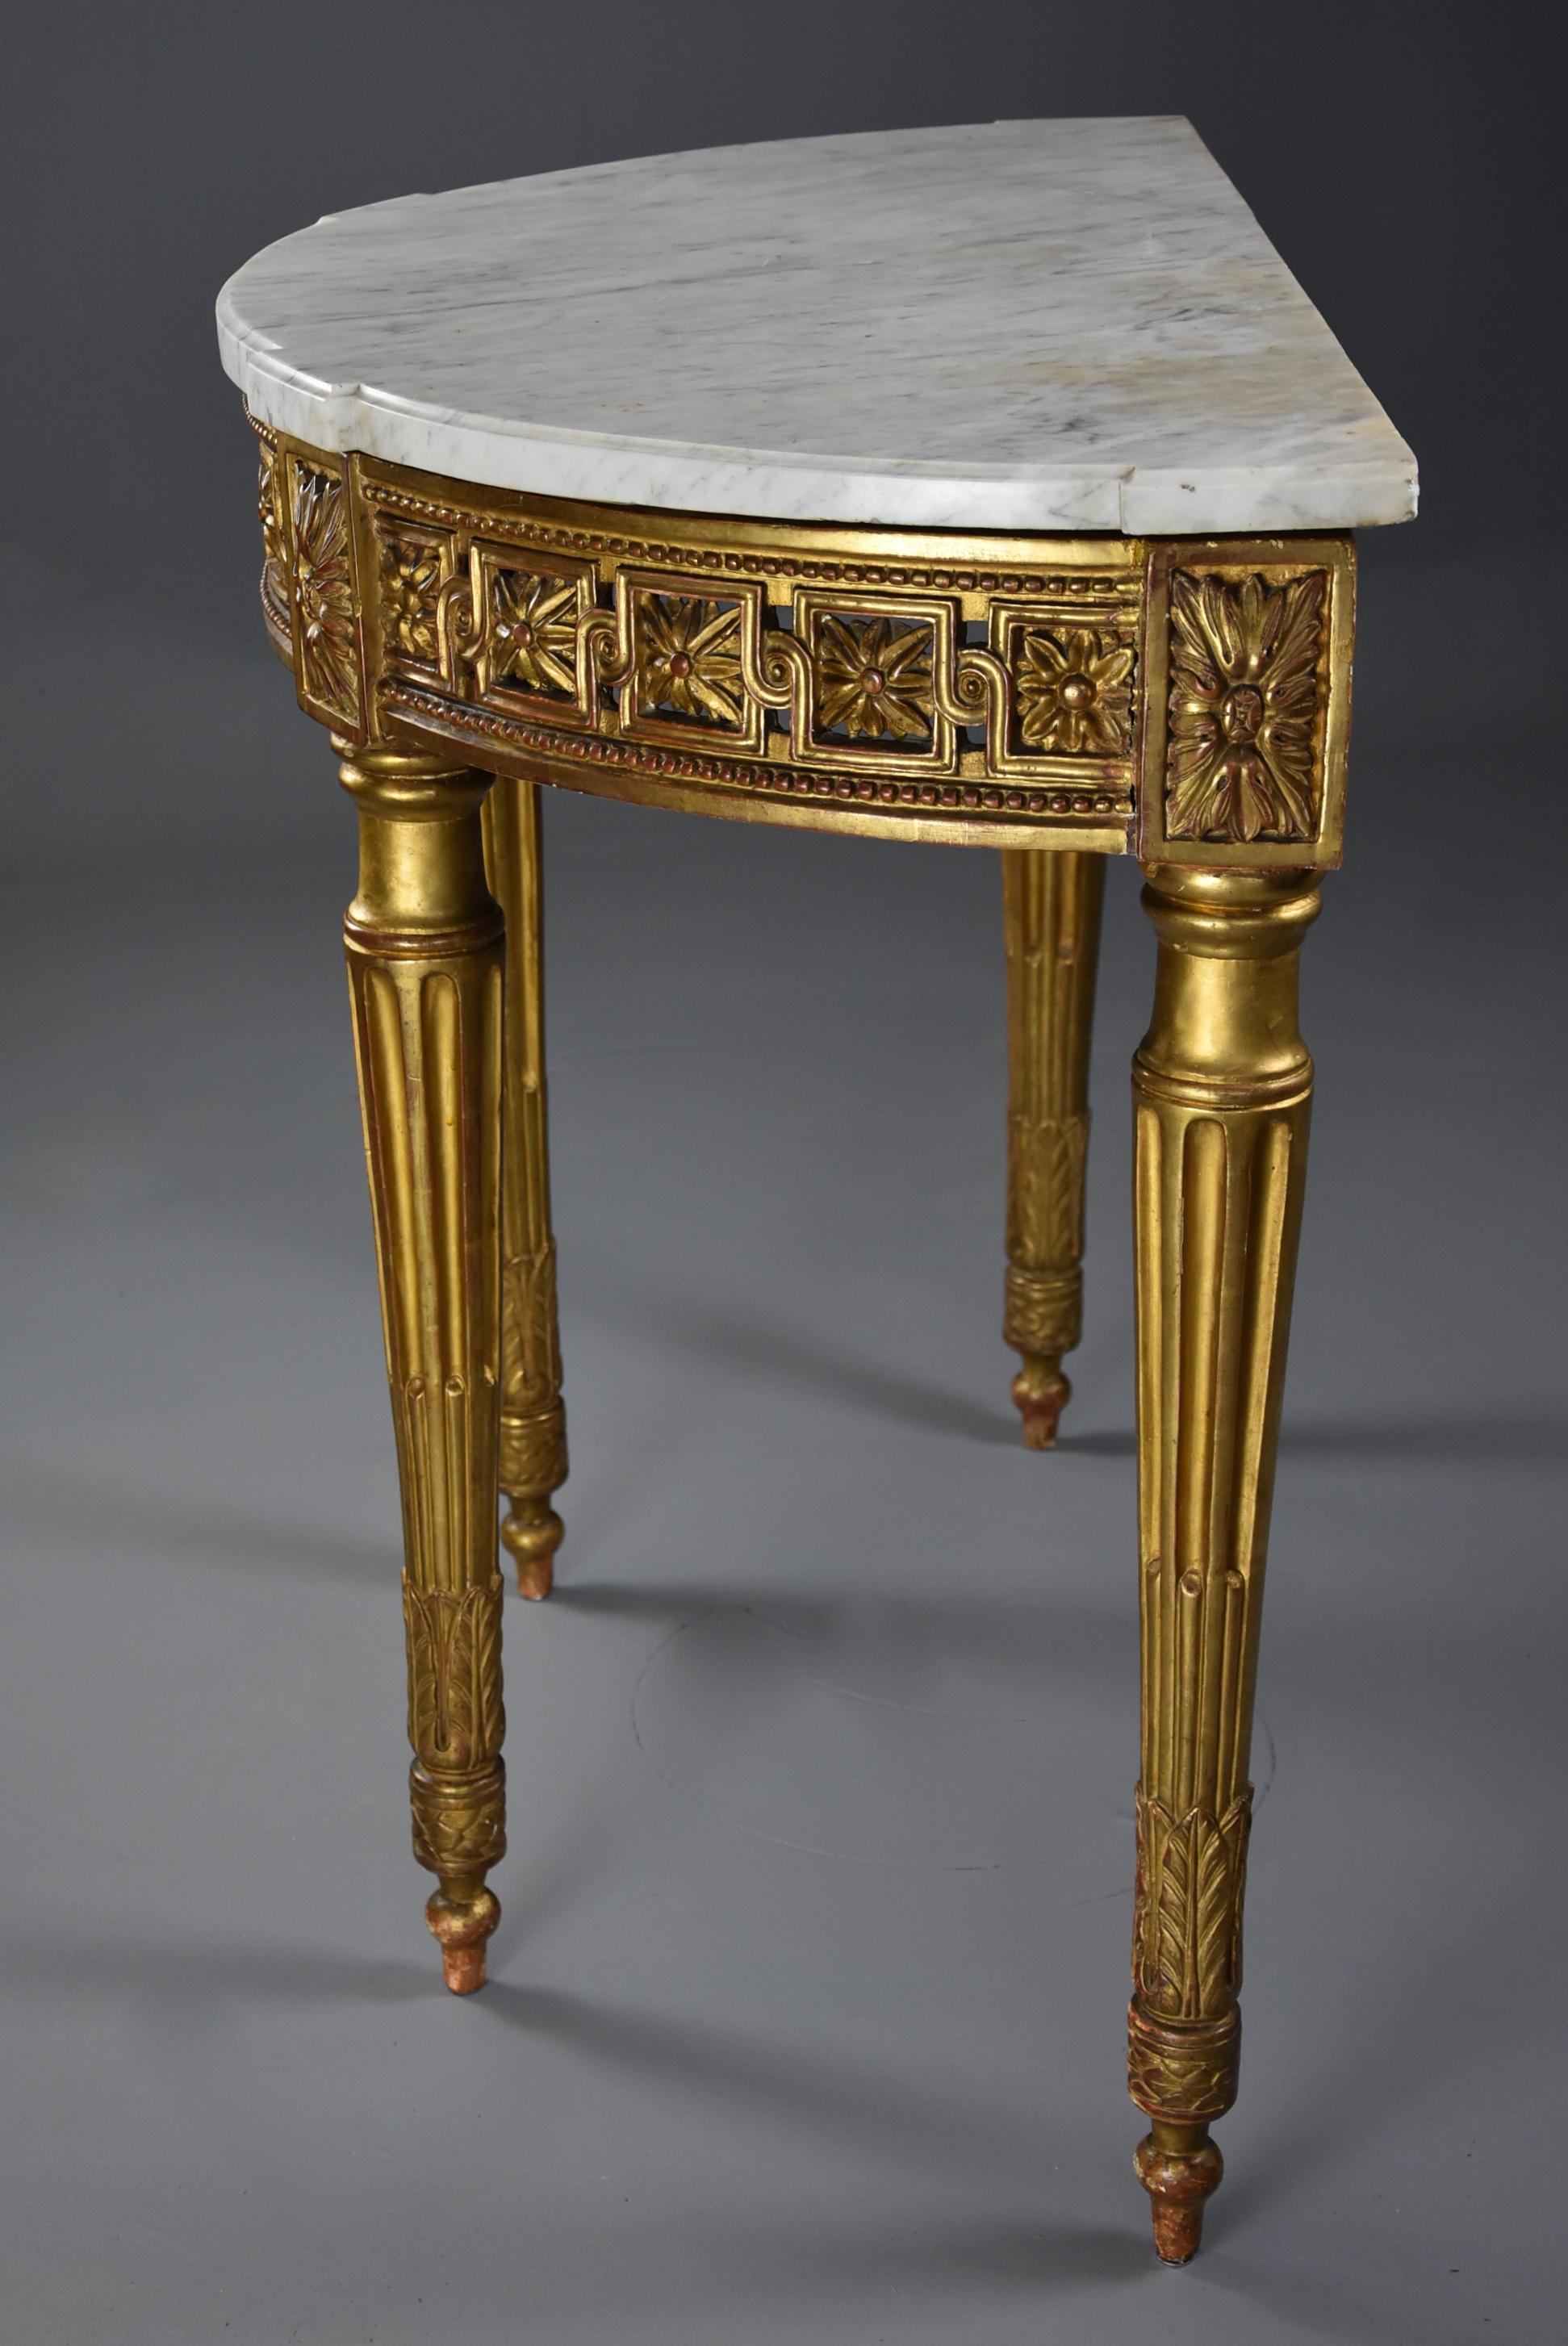 Highly Decorative 19th Century French Demilune Gilt Console Table For Sale 4